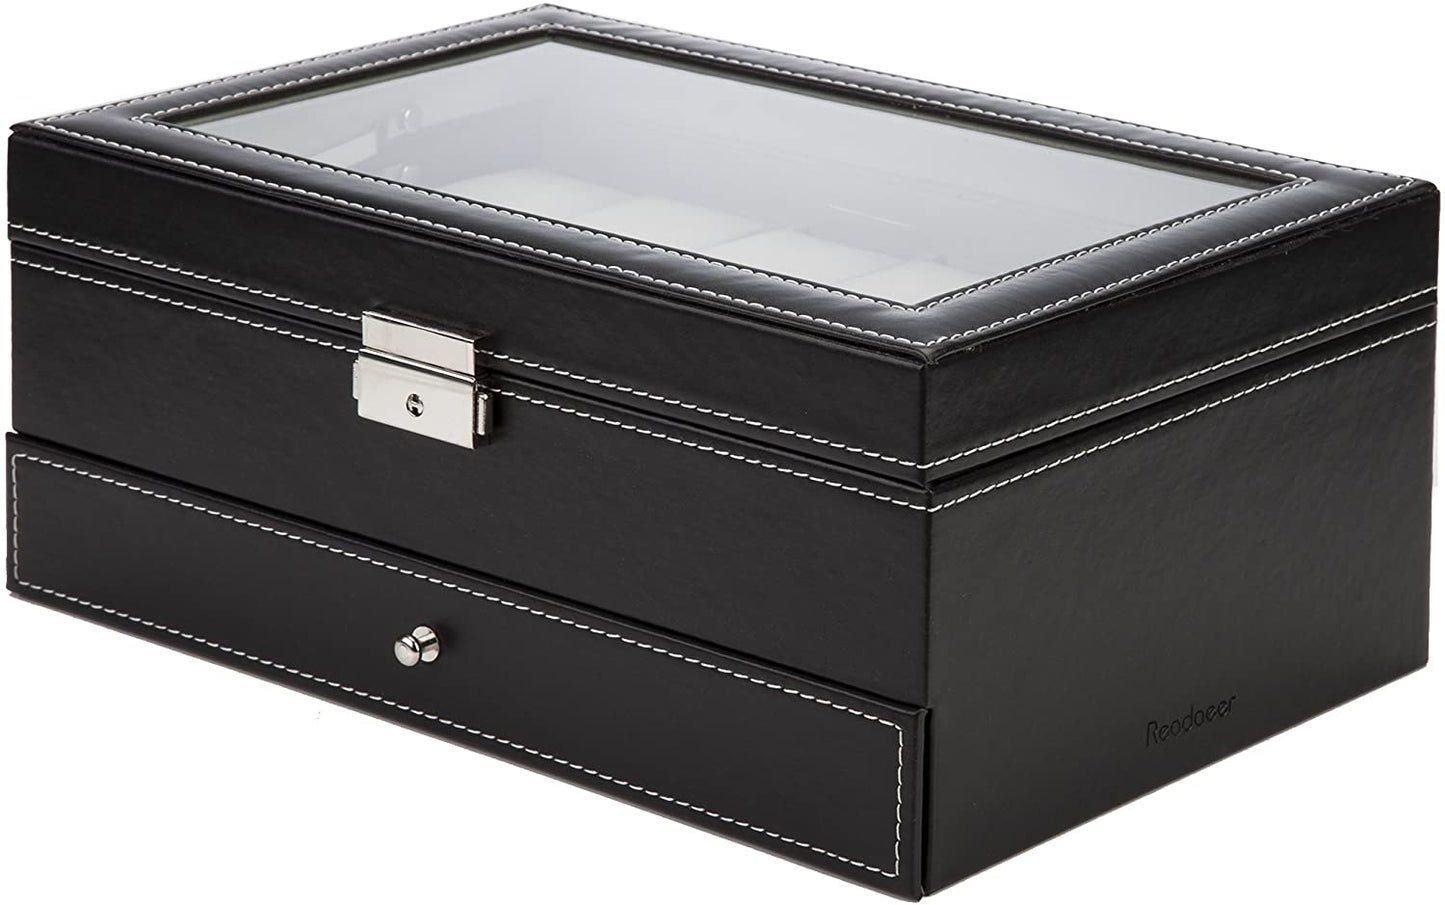 Black Leather Watch Box Jewelry Display Case with Drawers (12 Slots with 2 Layers) | Auzzi Store